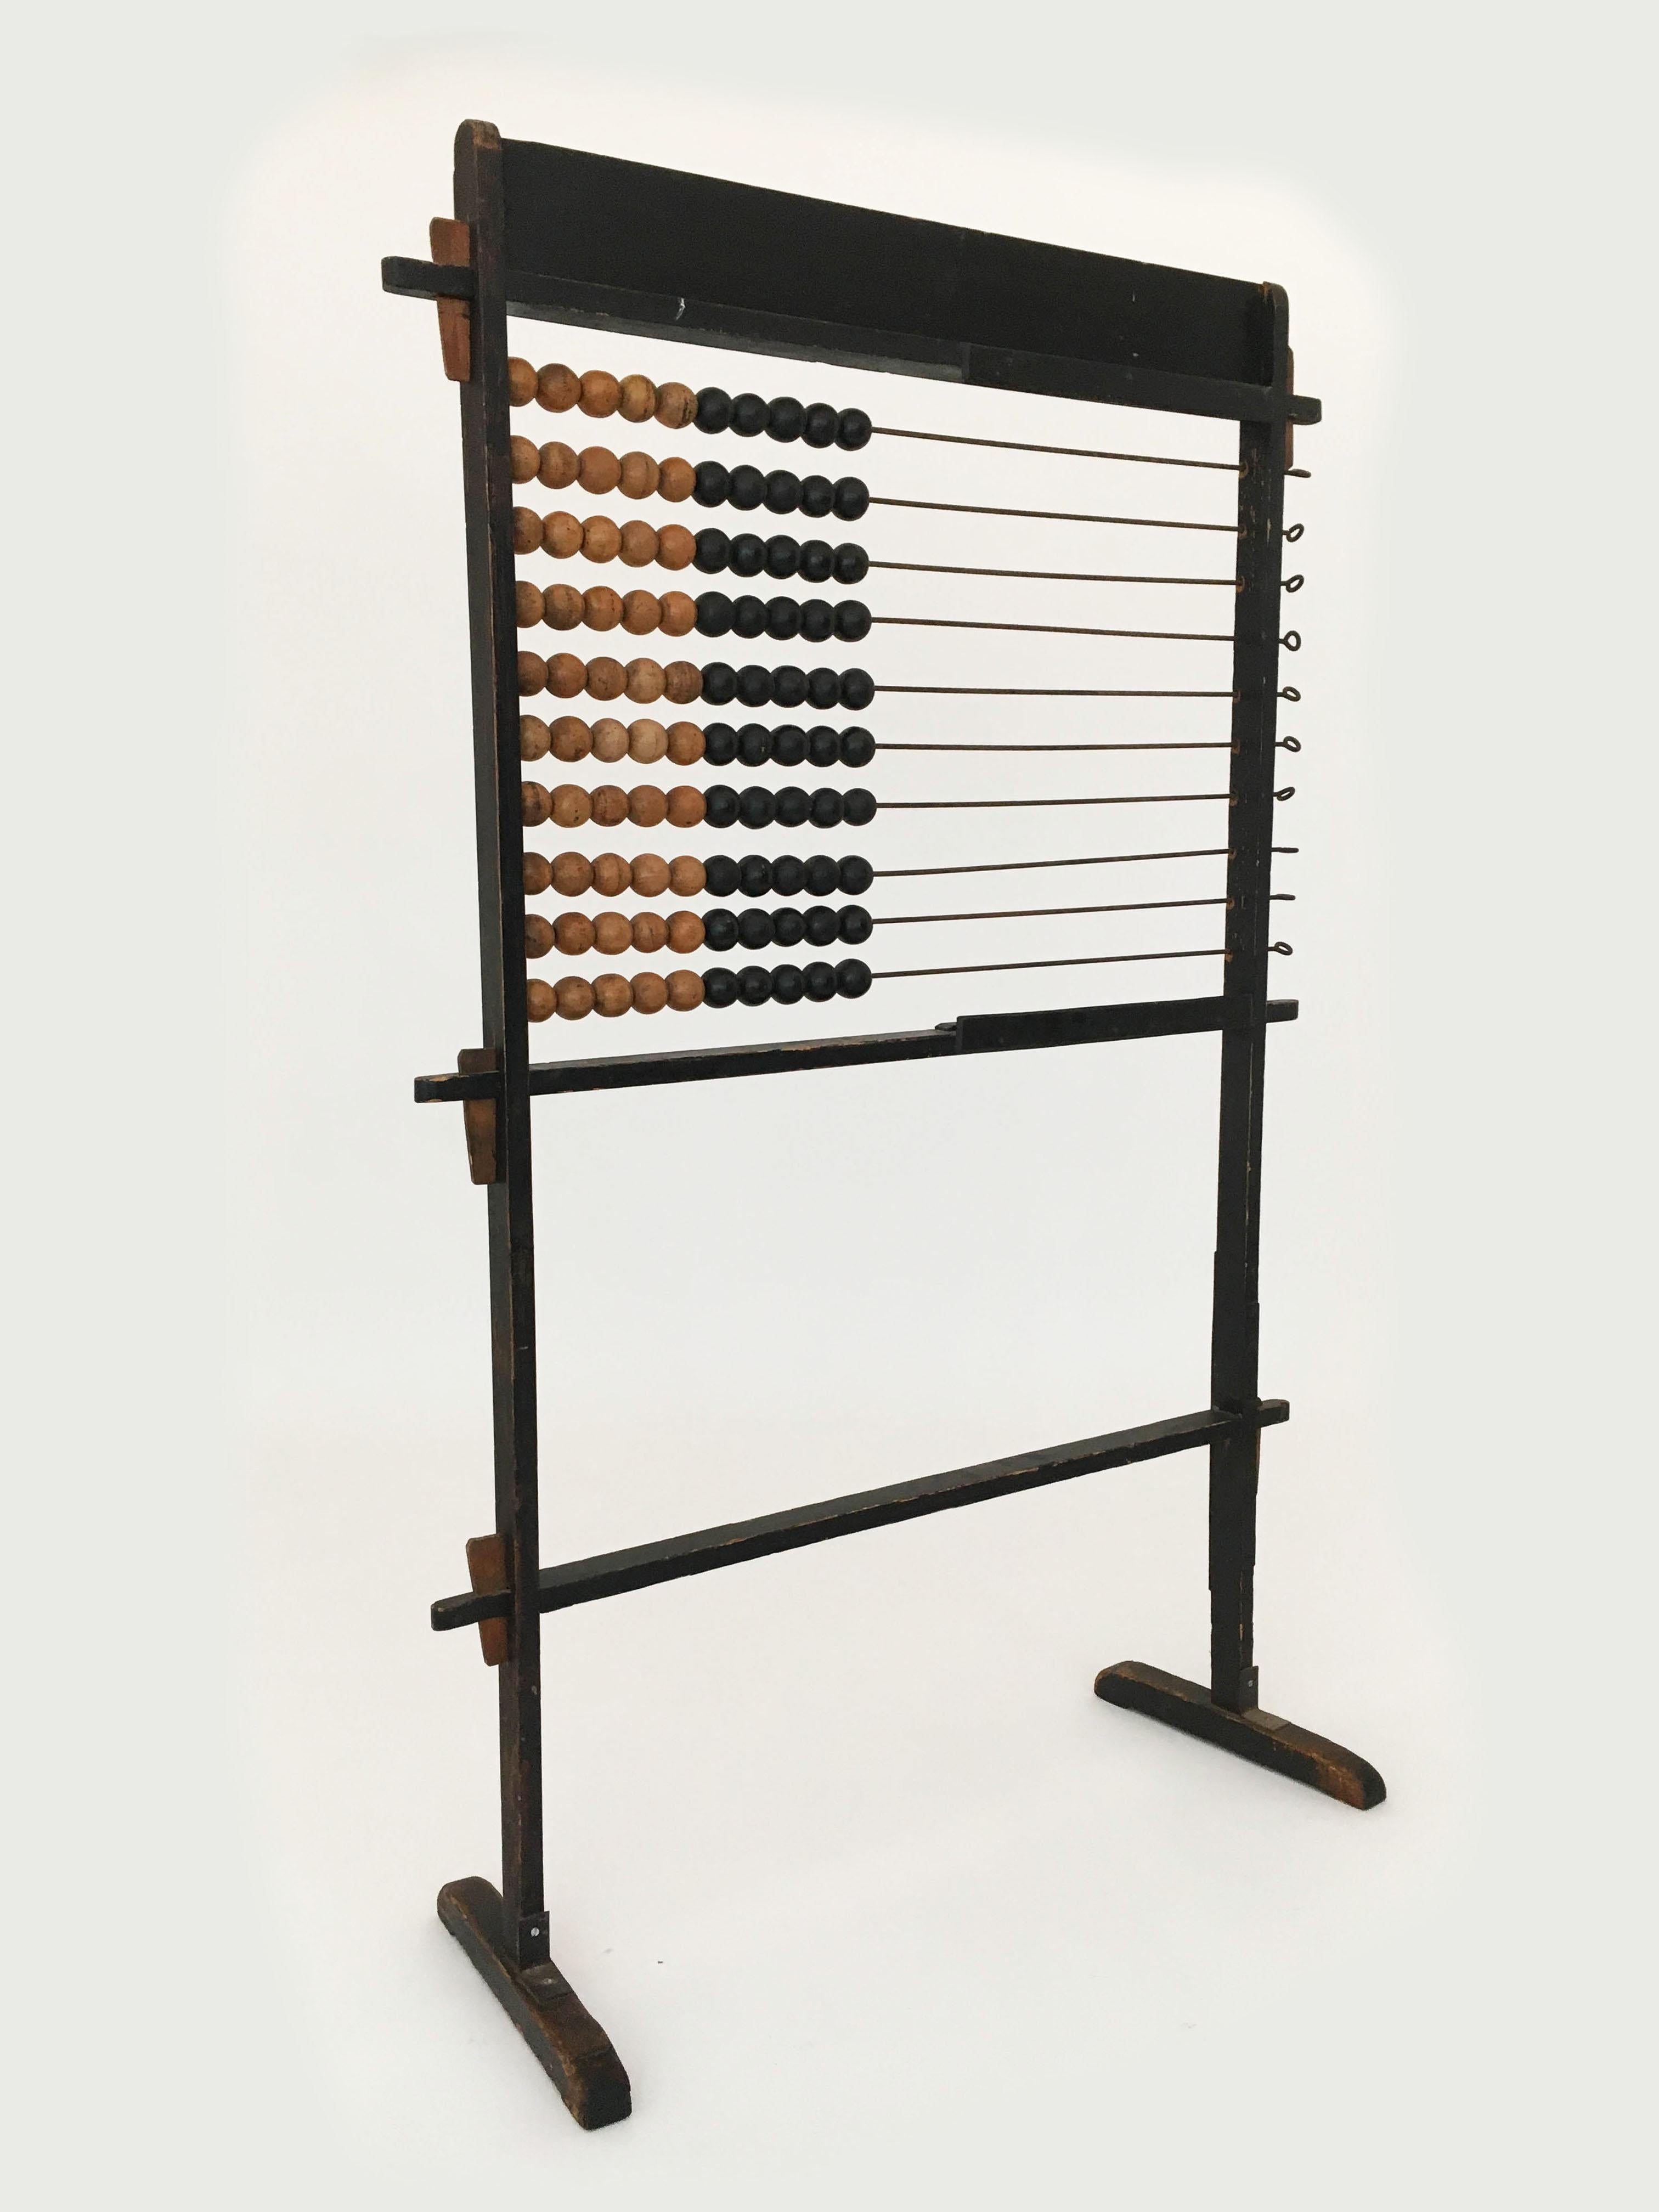 Form Follows Function Modern Abstract Abacus Obsolete Object, France, 1920s For Sale 4